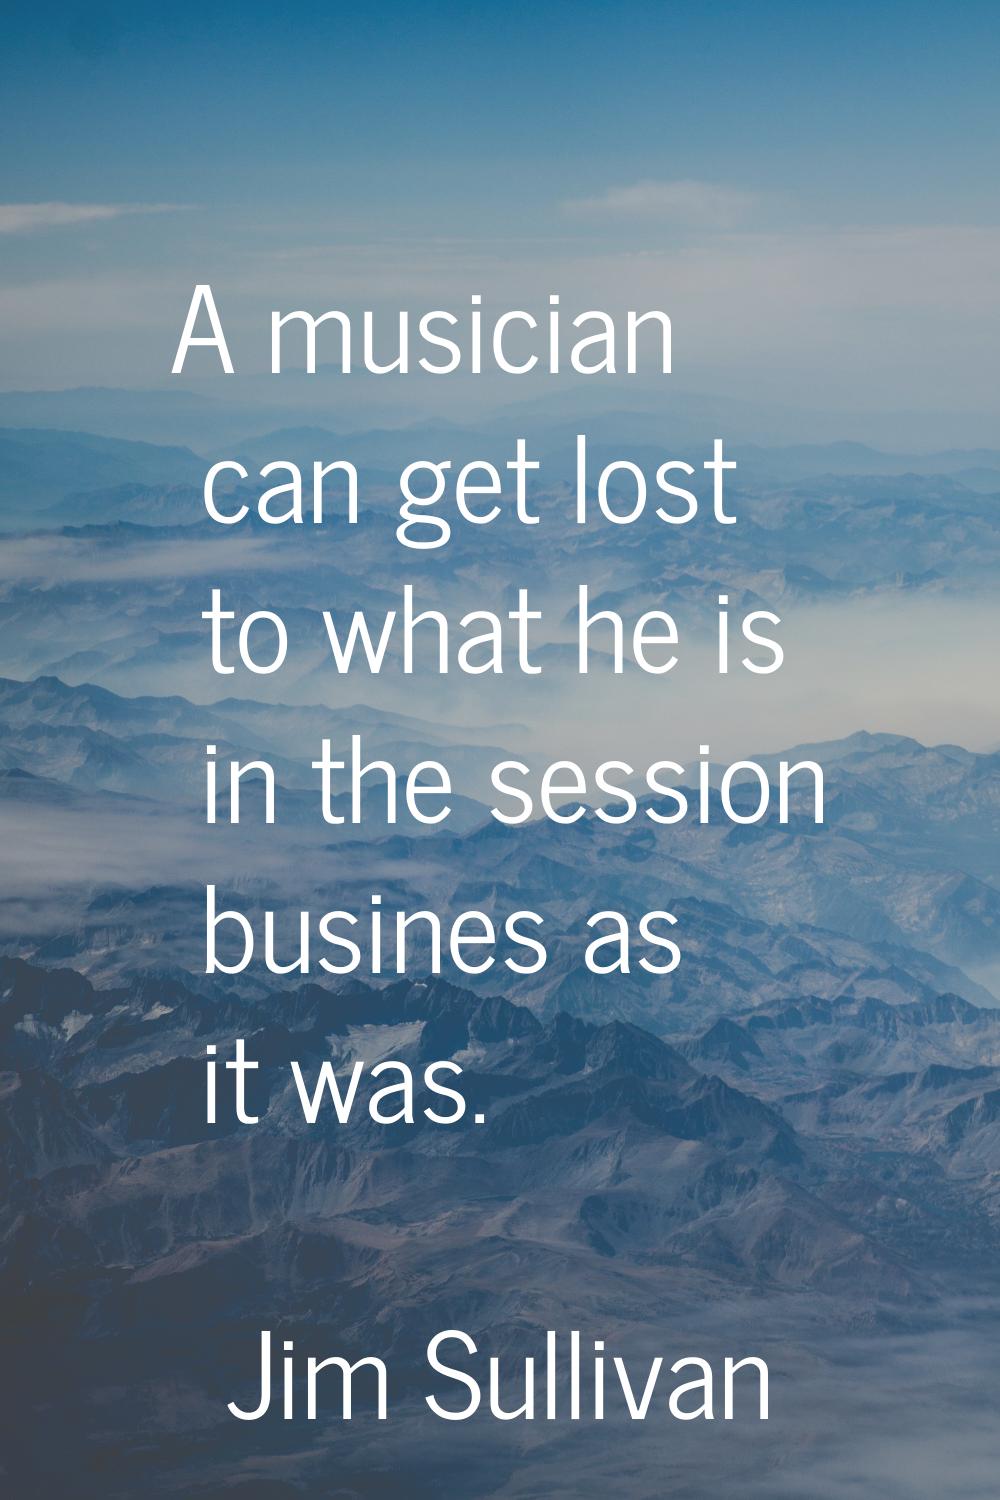 A musician can get lost to what he is in the session busines as it was.